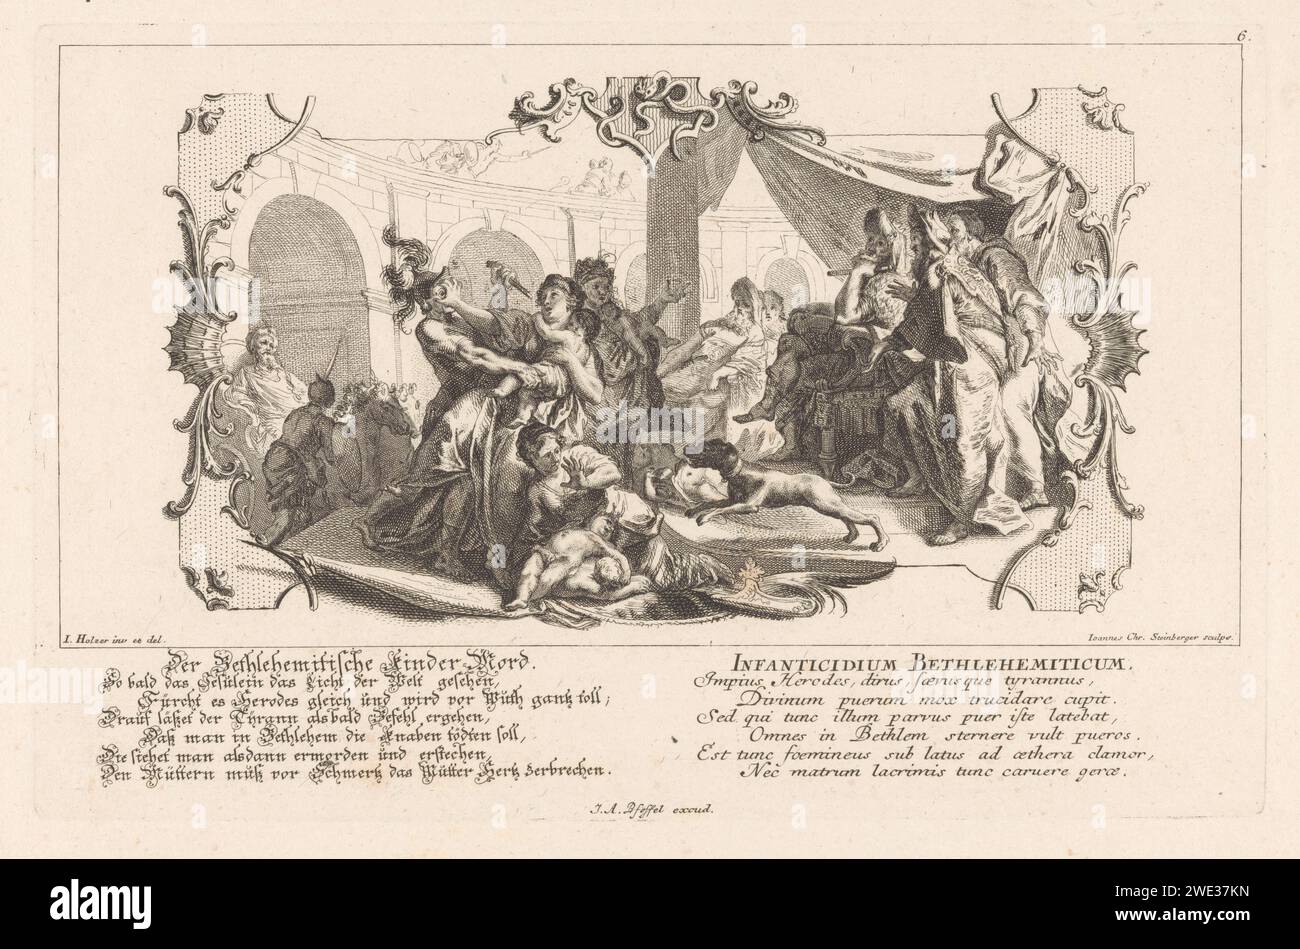 Children's Moord Te Bethlehem, Johann Christoph Steinberger, after Johann Evangelist Holzer, 1719 - 1727 print The child murder in Bethlehem. Under the watchful eye of King Herod, seated on his throne, newborn children are killed by soldiers. In vain, mothers try to protect their sons. A rocaille frame around the show. Twice a seven -line German and Latin text in the lower margin. Augsburg paper etching the massacre ot the innocents; sometimes Herod looking on Stock Photo